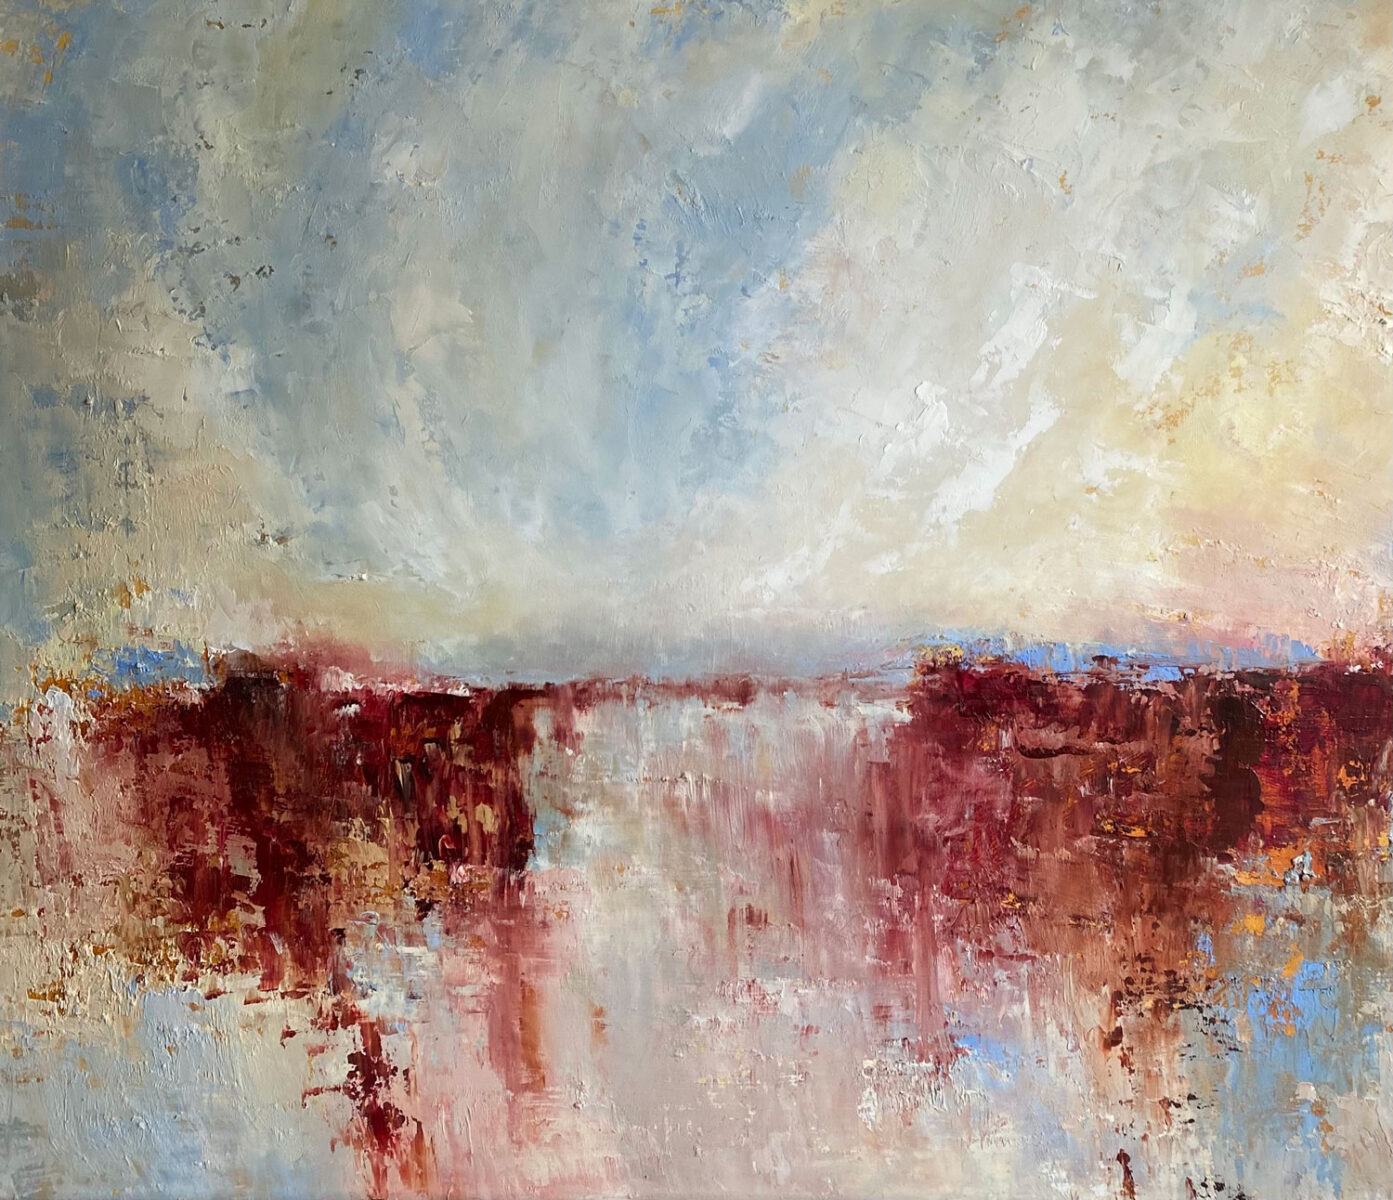 Horizon at the Worlds End - original landscape oil painting by Emily McCormack